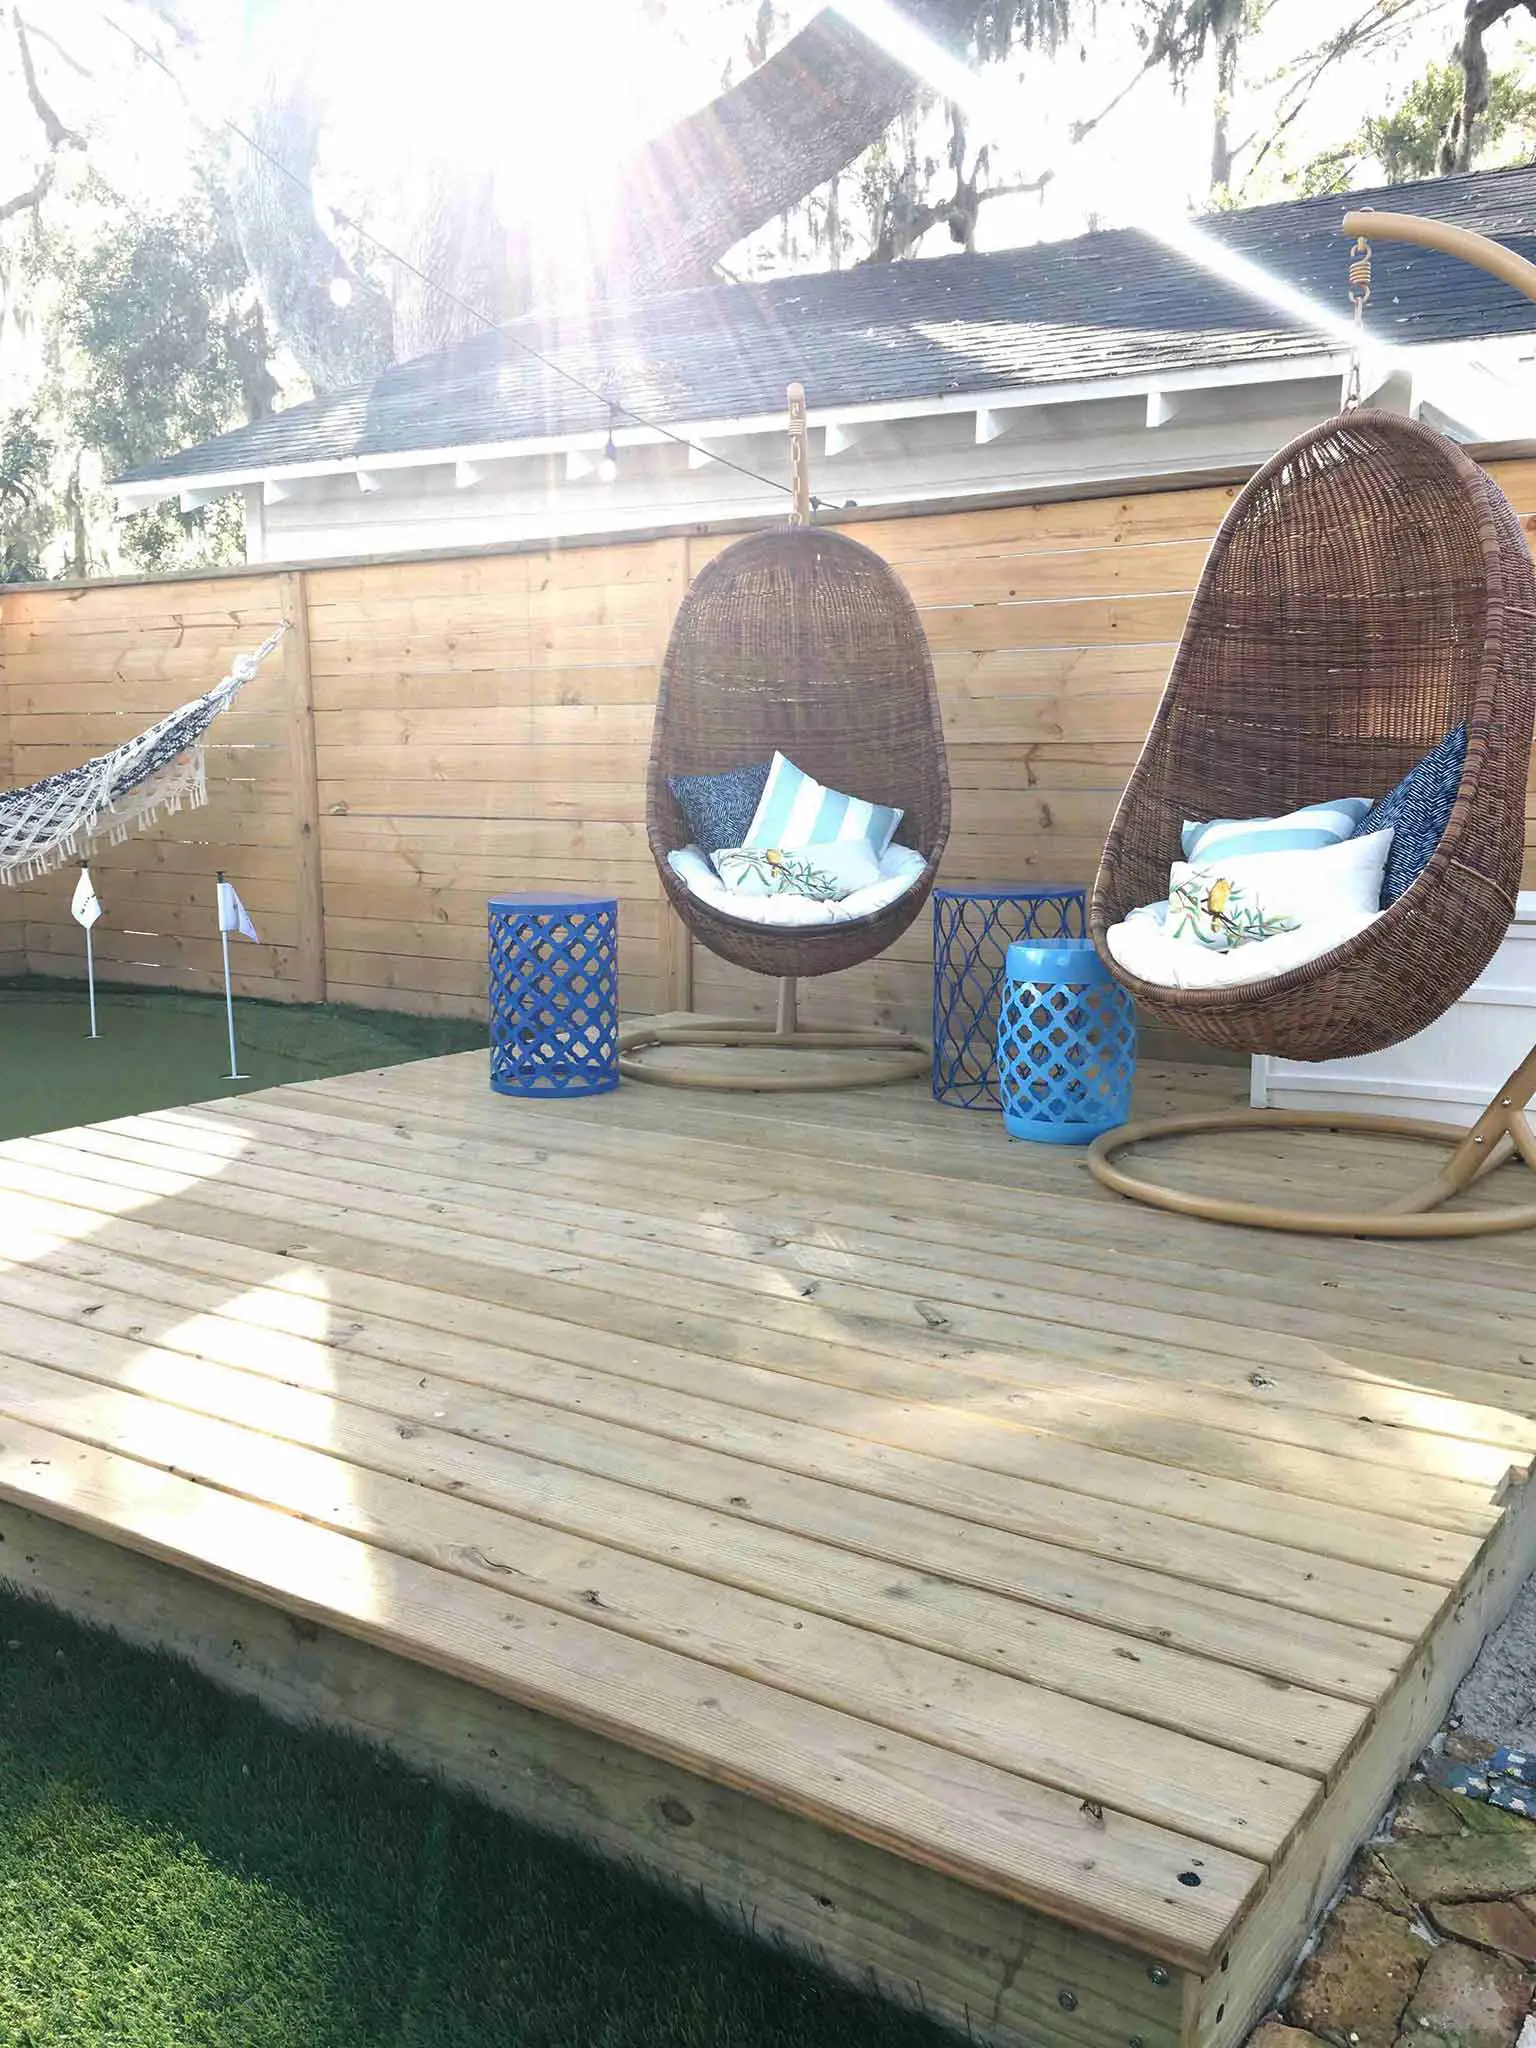 Seating area with hanging chairs - How we planned our backyard space - That Homebird Life Blog